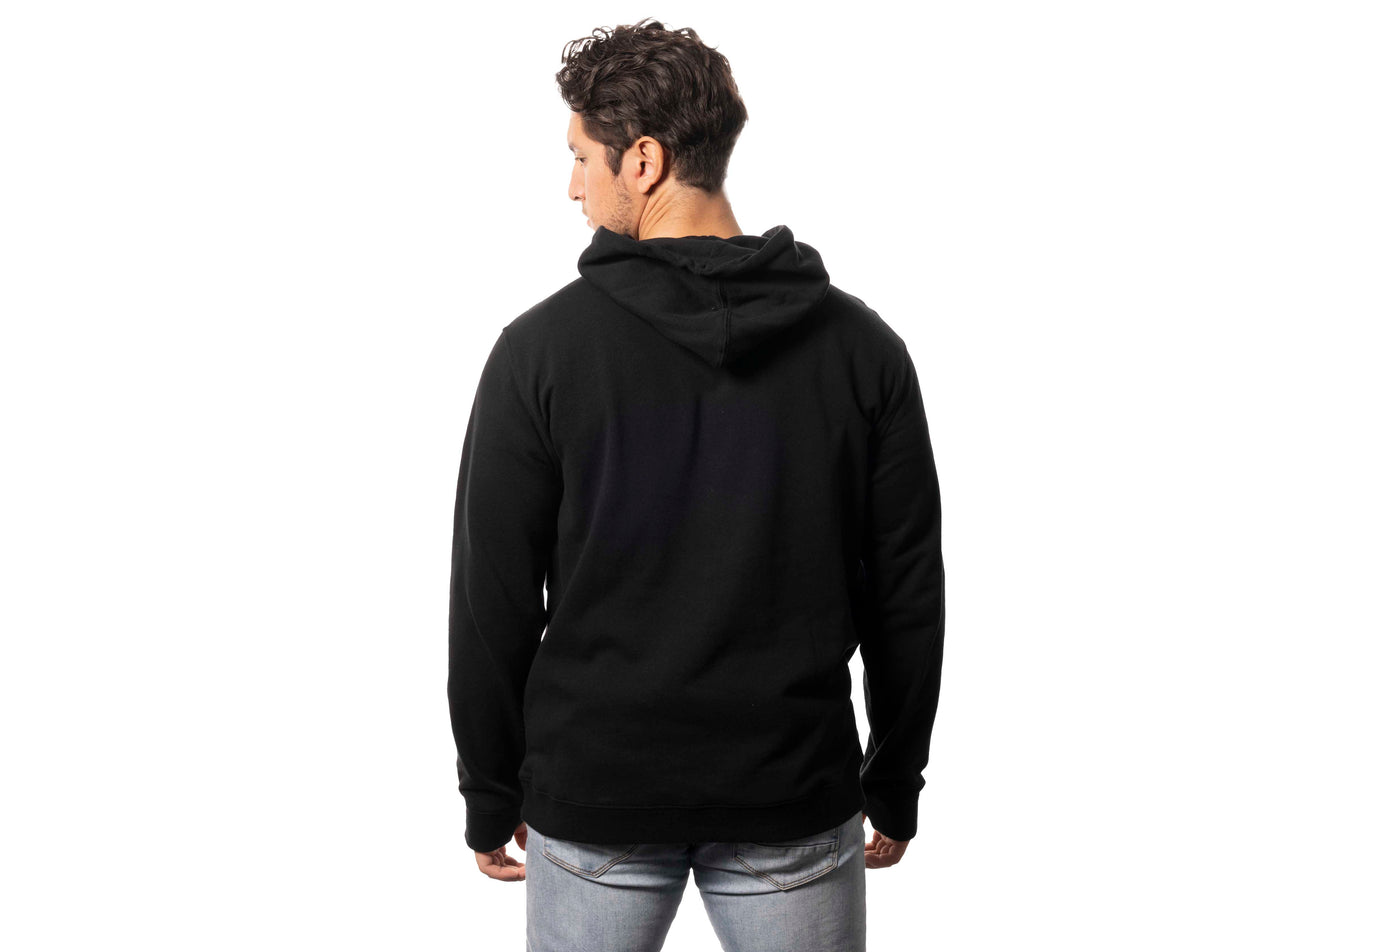 Core Hoodie by Evolve Skateboards